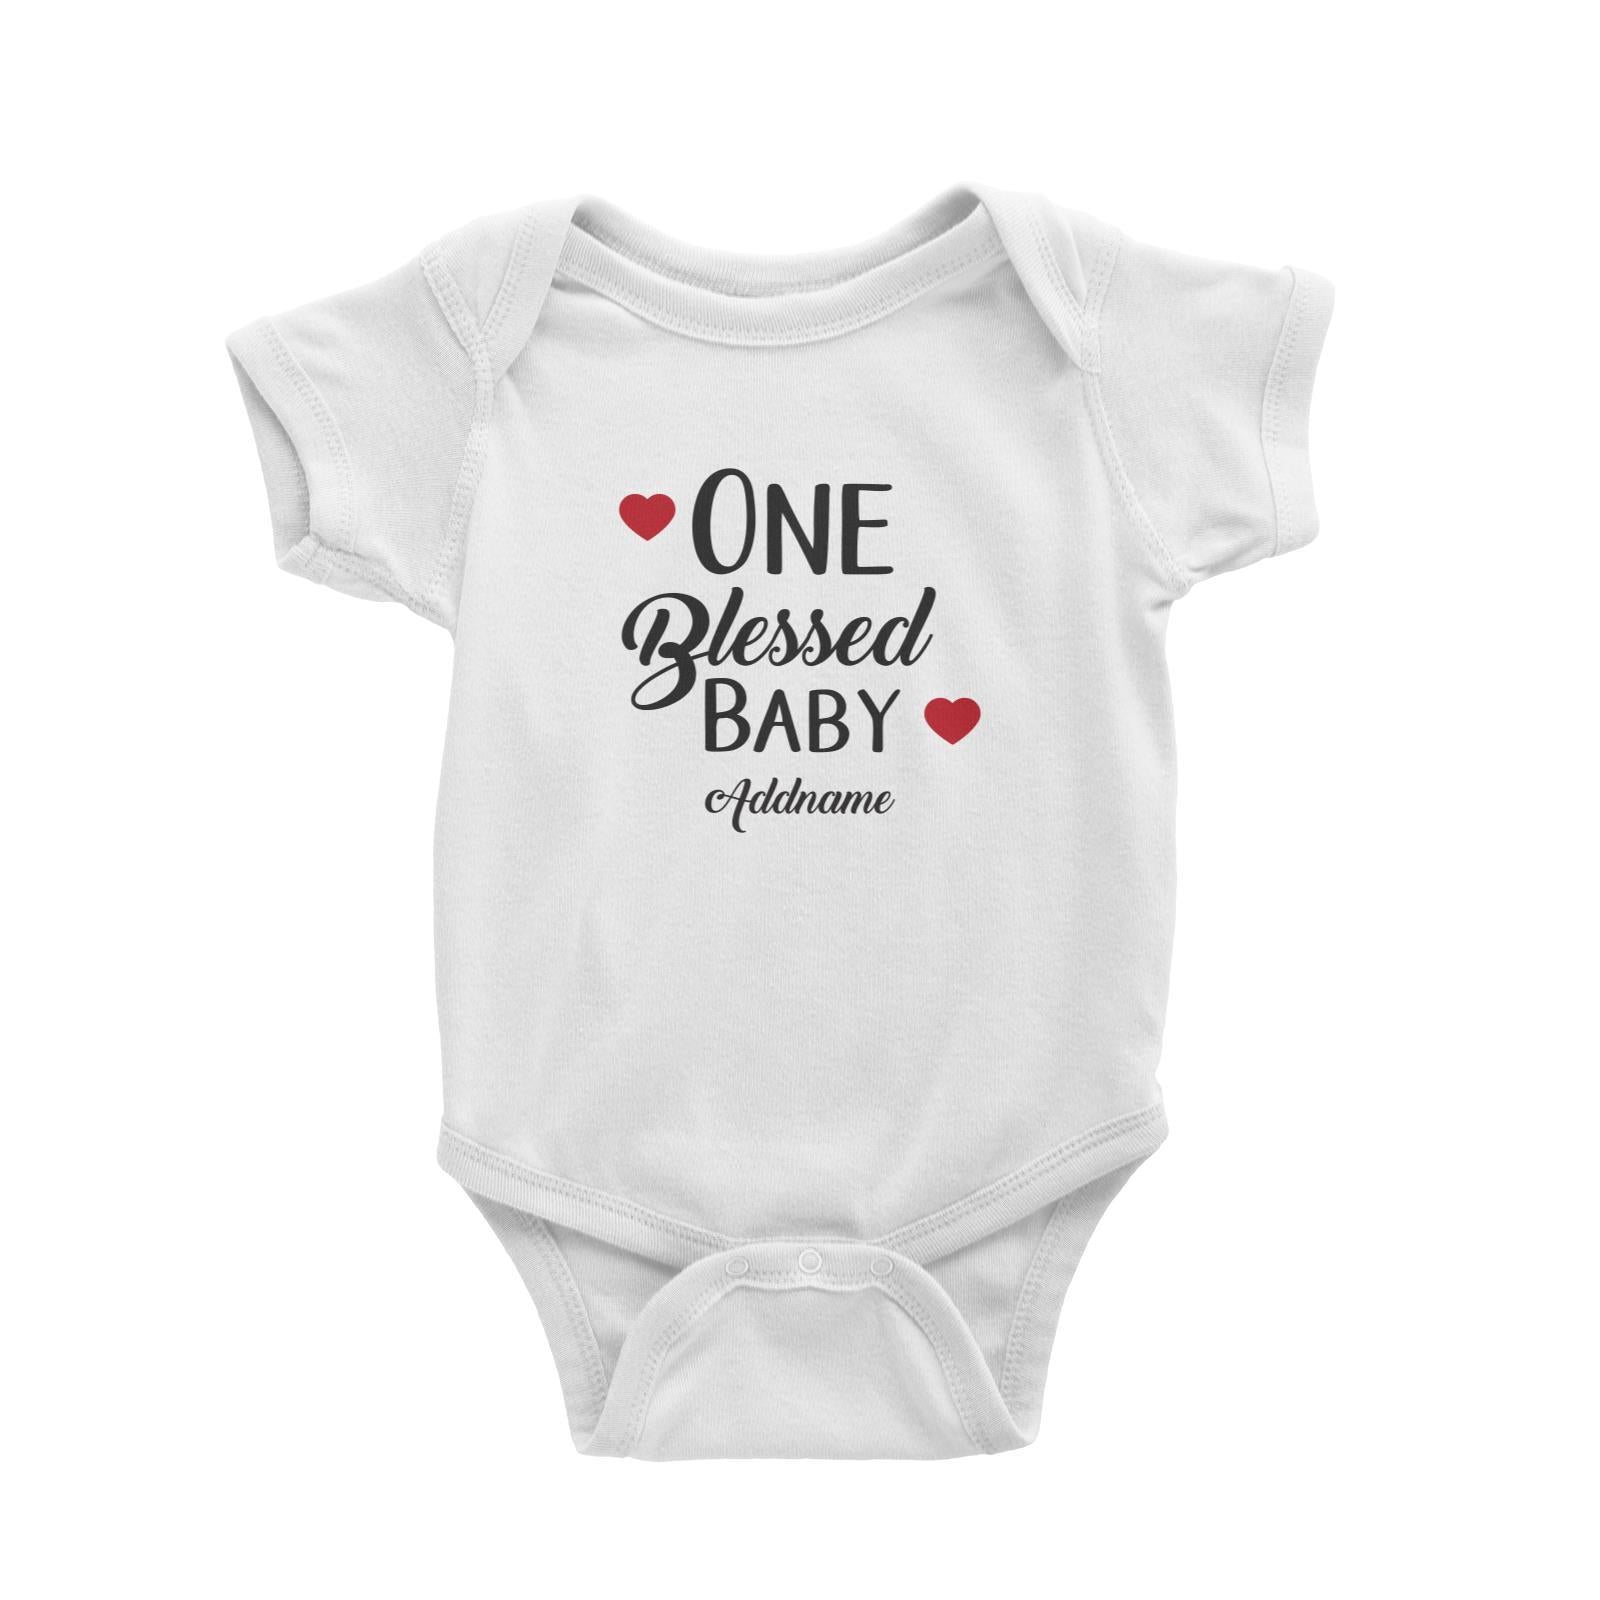 Christian Series One Blessed Baby Addname Baby Romper